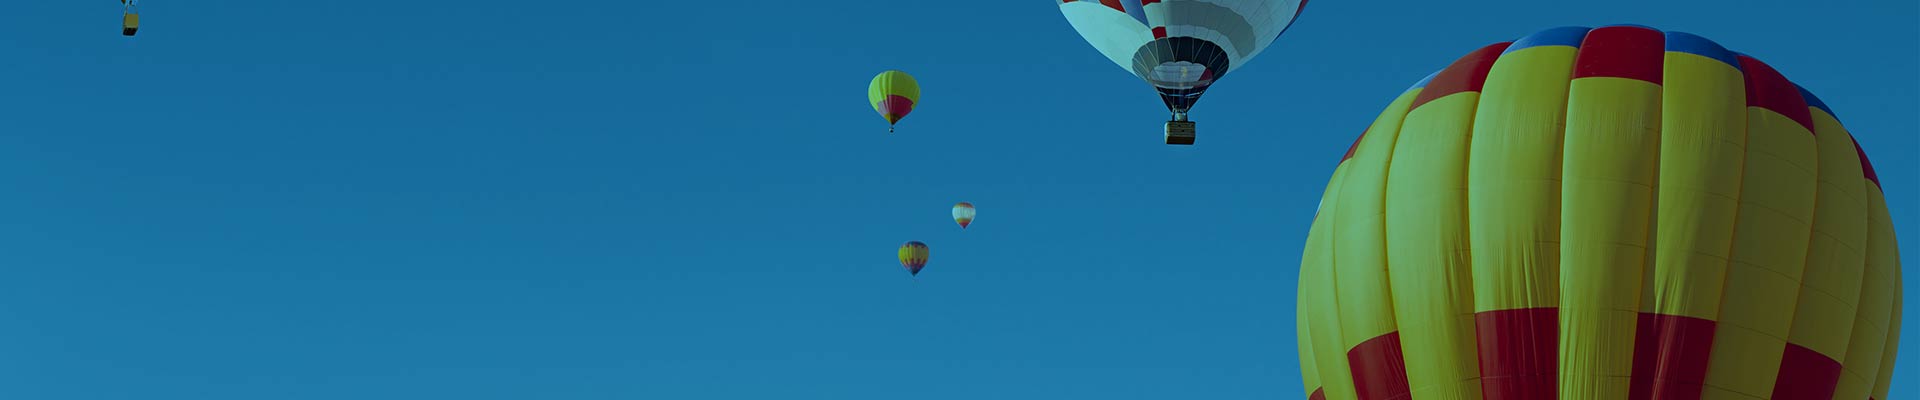 Booking Information for Hot Air Balloon Rides